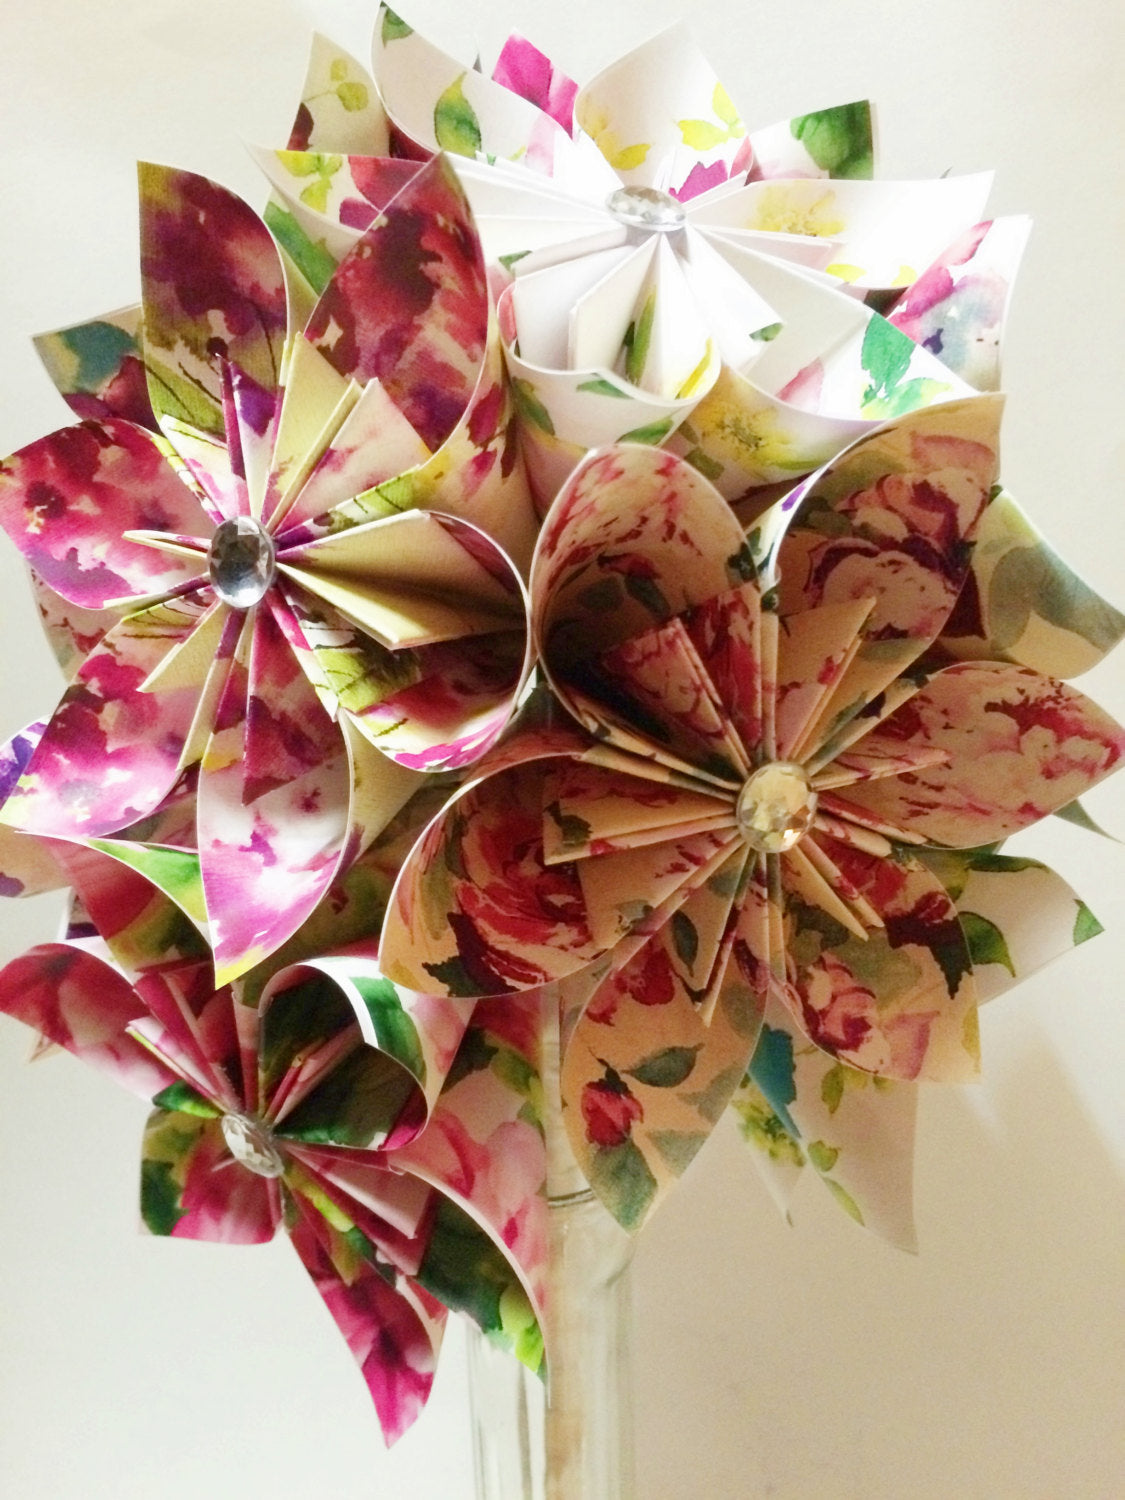 Brides Bouquet of Paper Daisies & Lilies- one of a kind origami, made –  Dana's Paper Flowers